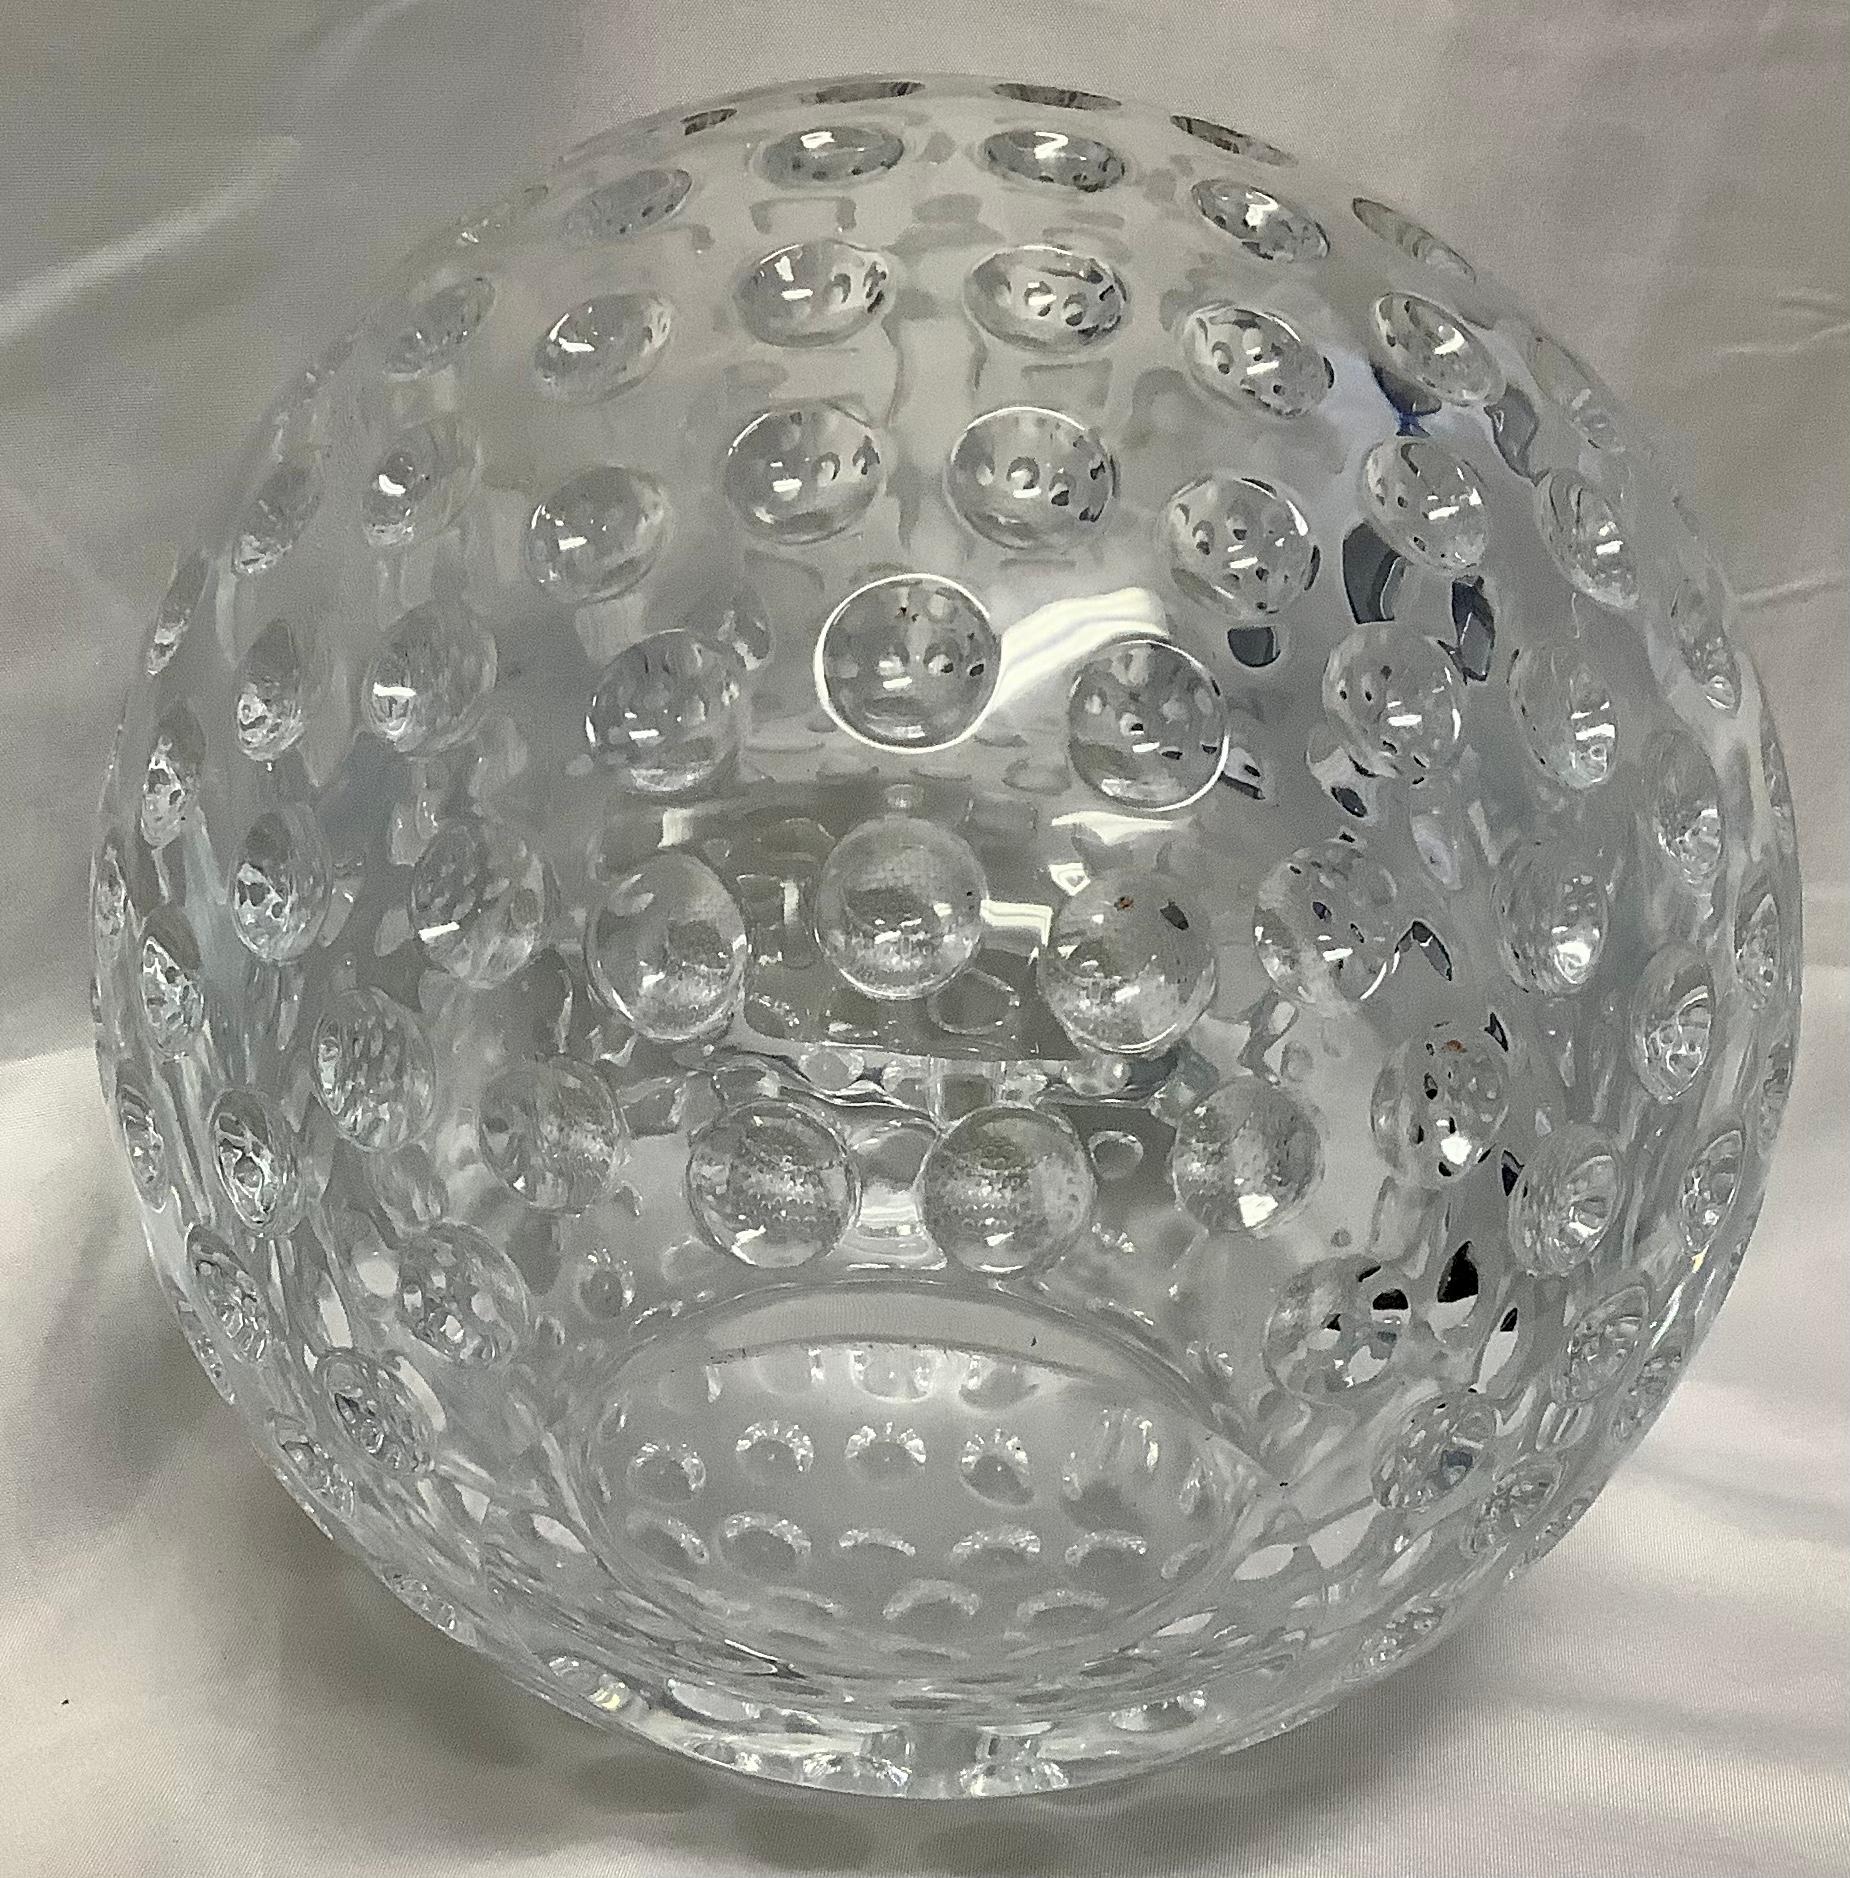 Spherical Lucite Ice Bucket Resembles a Large Golf Ball 4